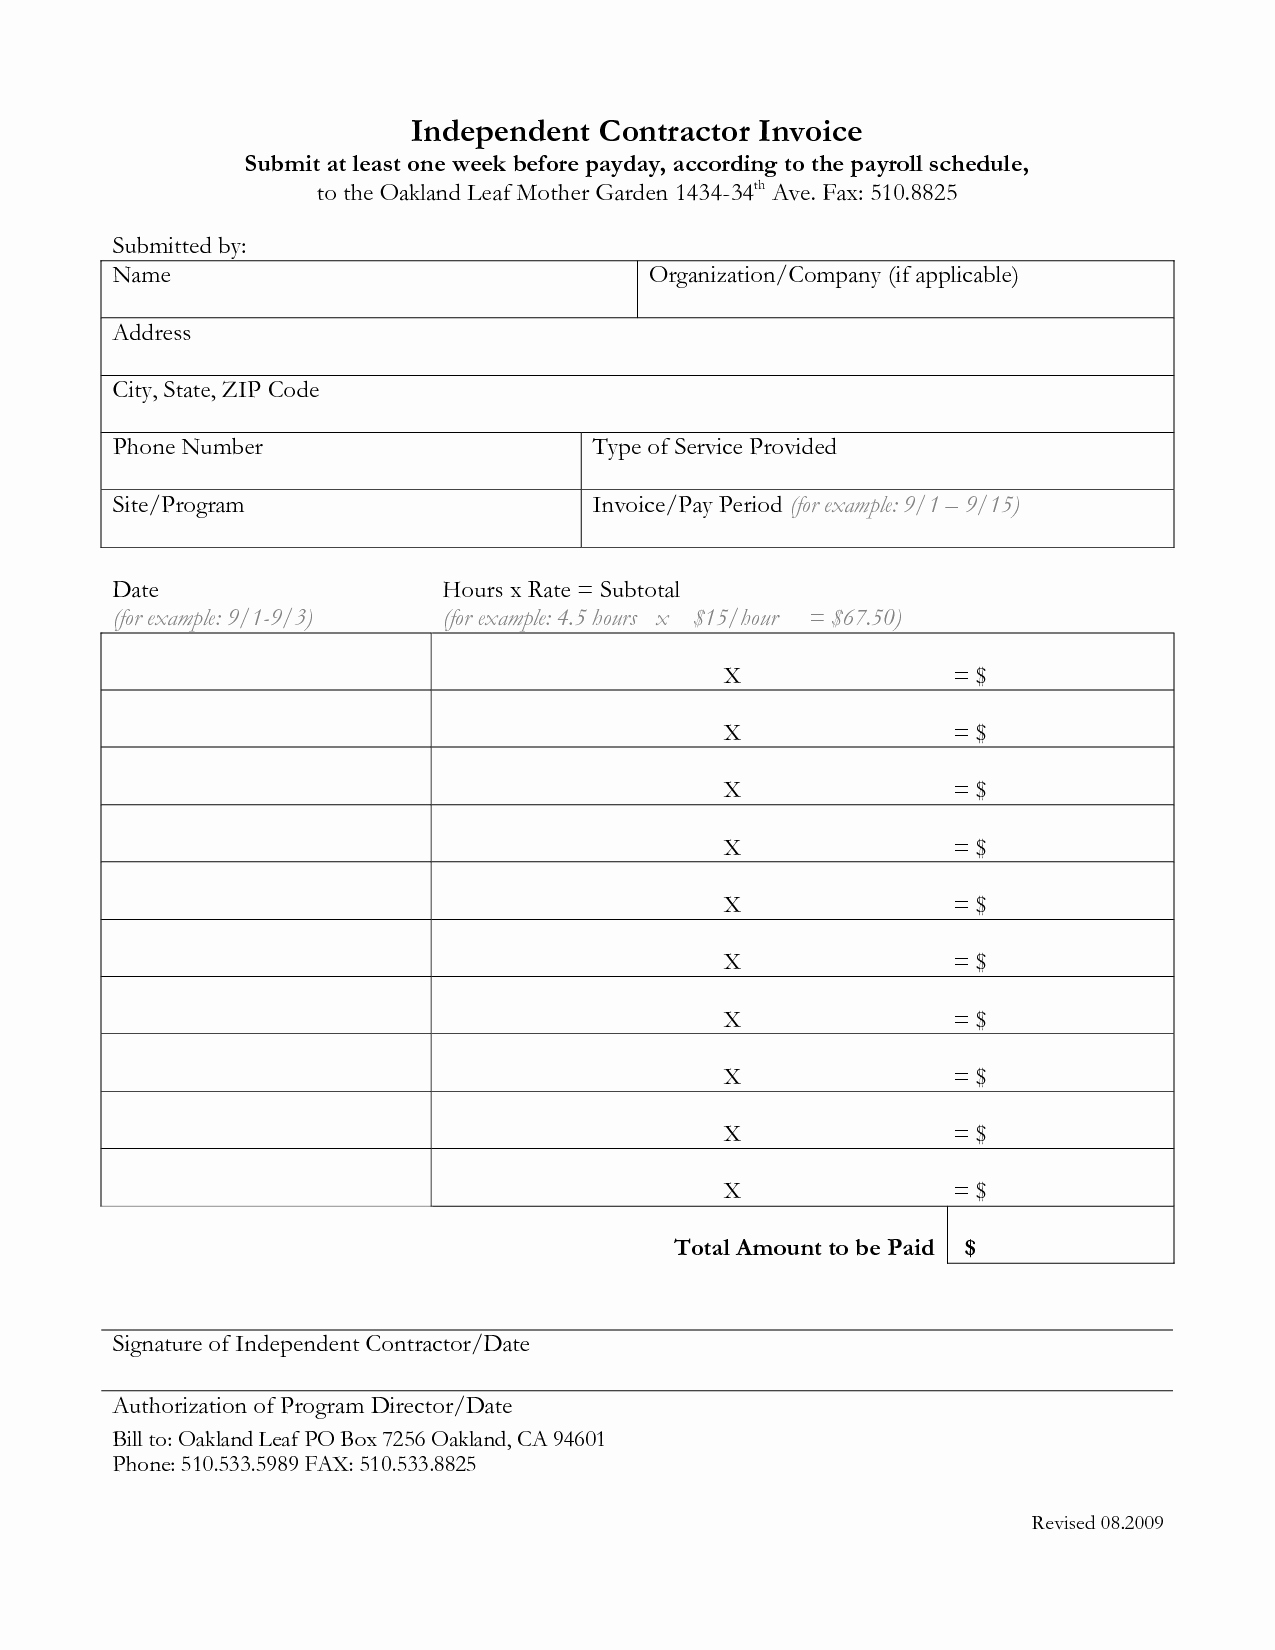 Free Construction Invoice Template Best Of Independent Contractor Invoice Template Free